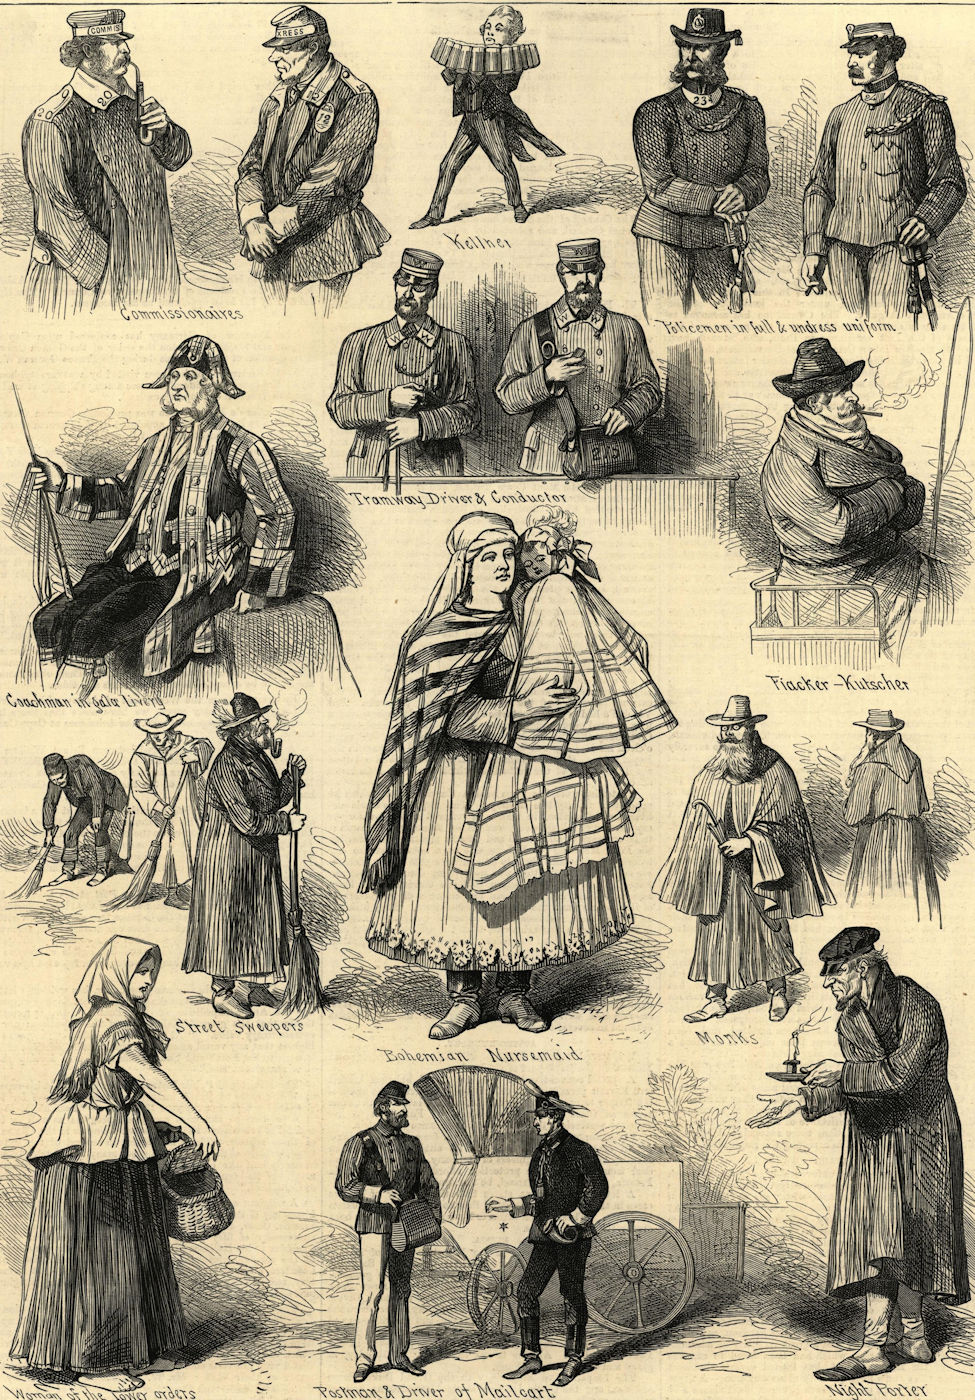 Associate Product Types of Viennese Life. Austria. Society 1873 antique ILN full page print